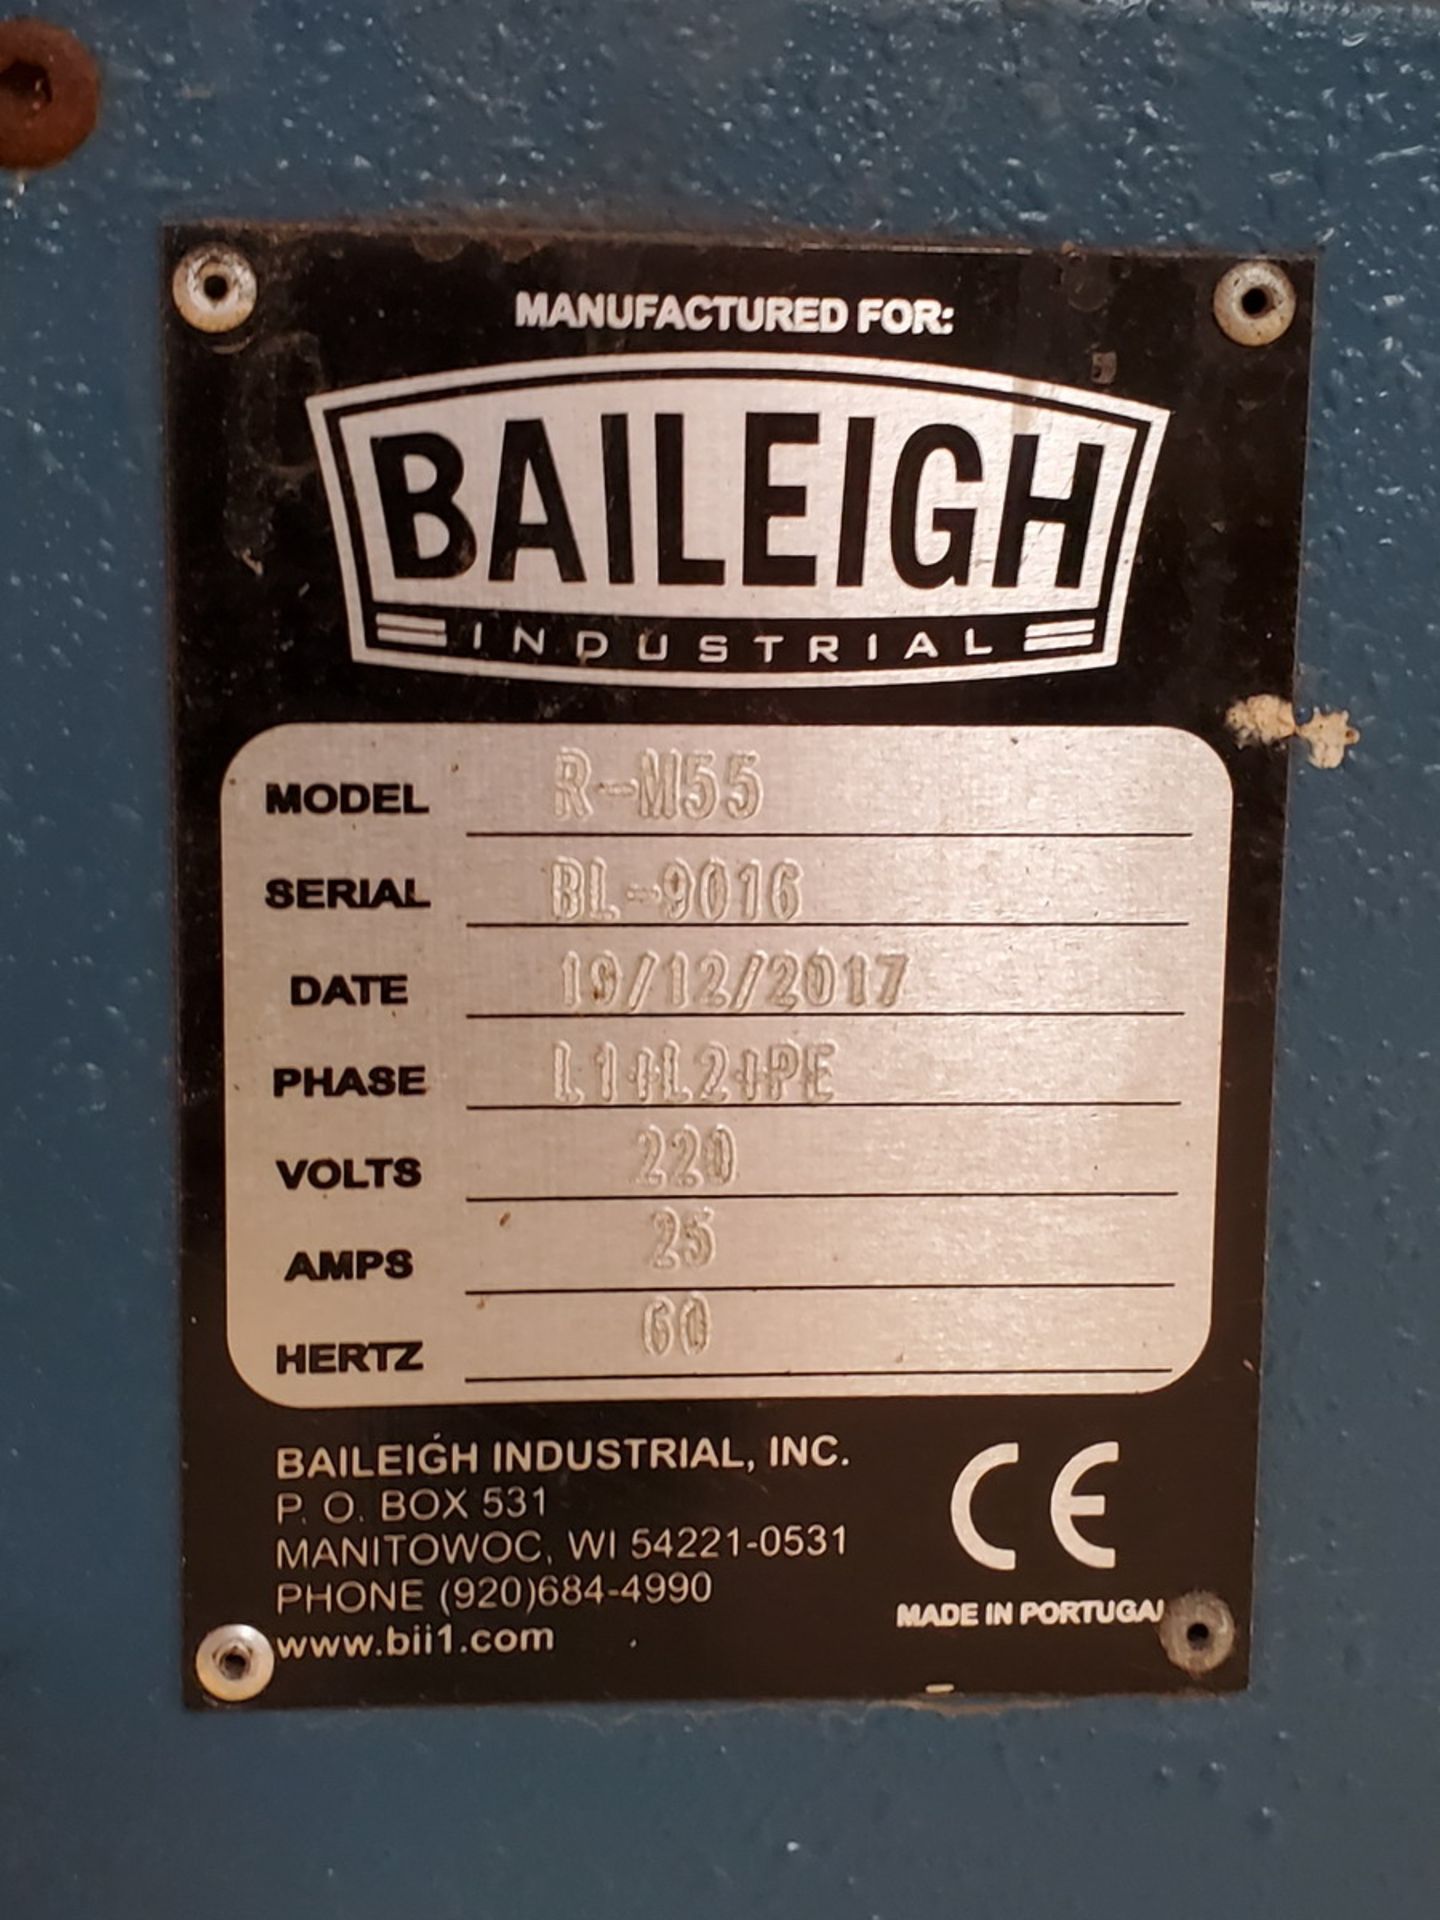 2017 Baleigh R-M55 Hydraulic Roll Bender 25A, 220V, 60HZ, 1PH - Image 8 of 8